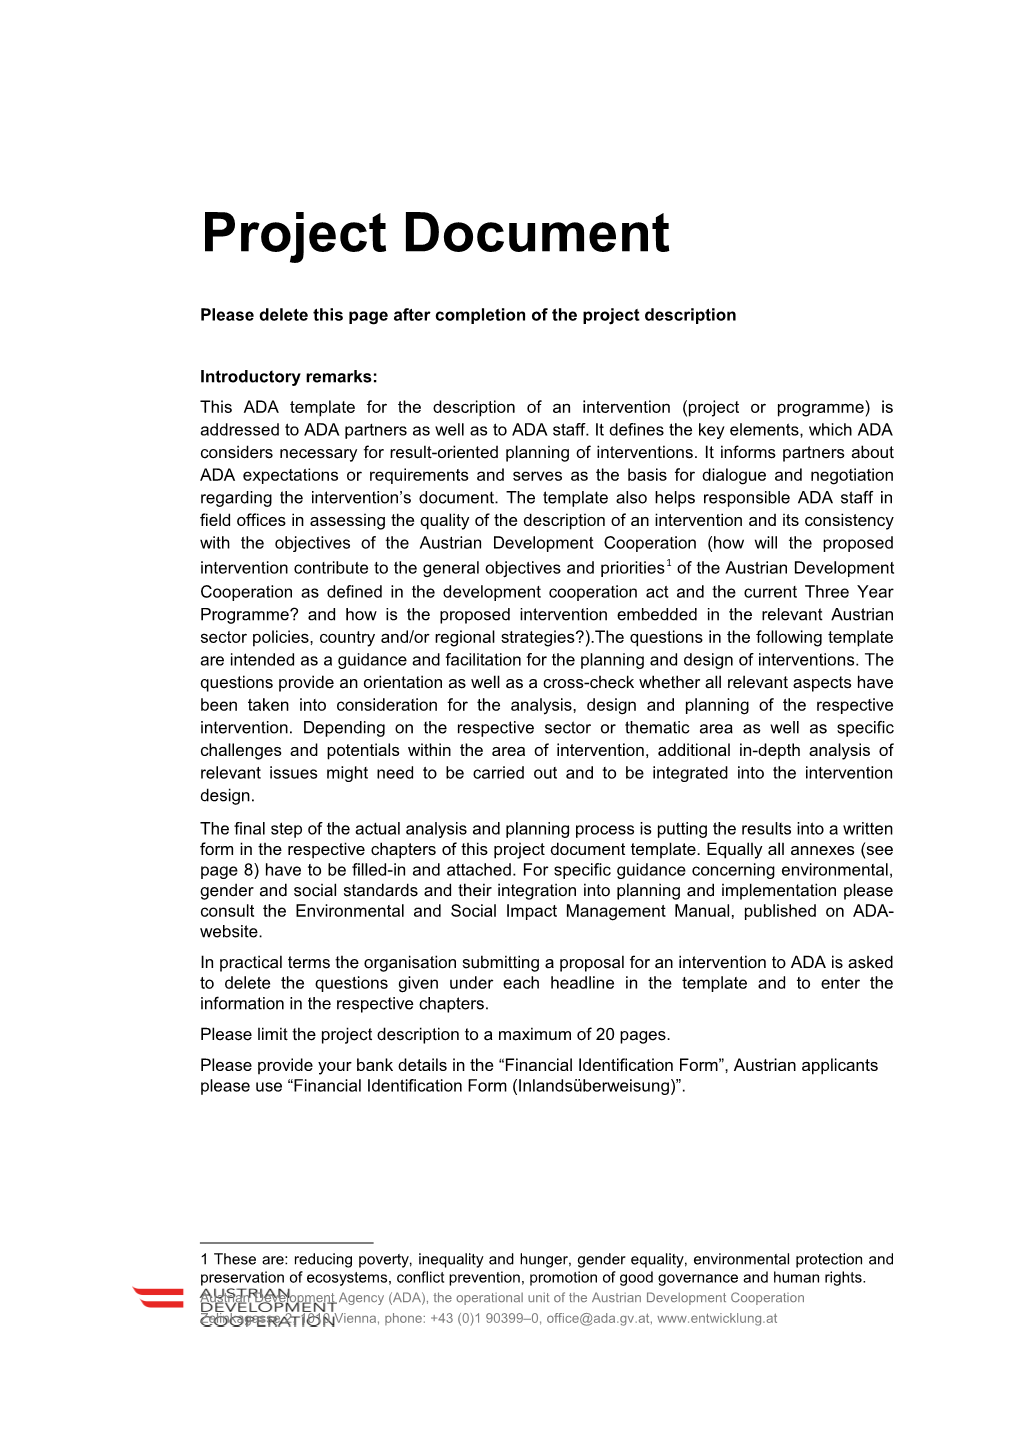 Please Deletethis Page After Completion of the Project Description